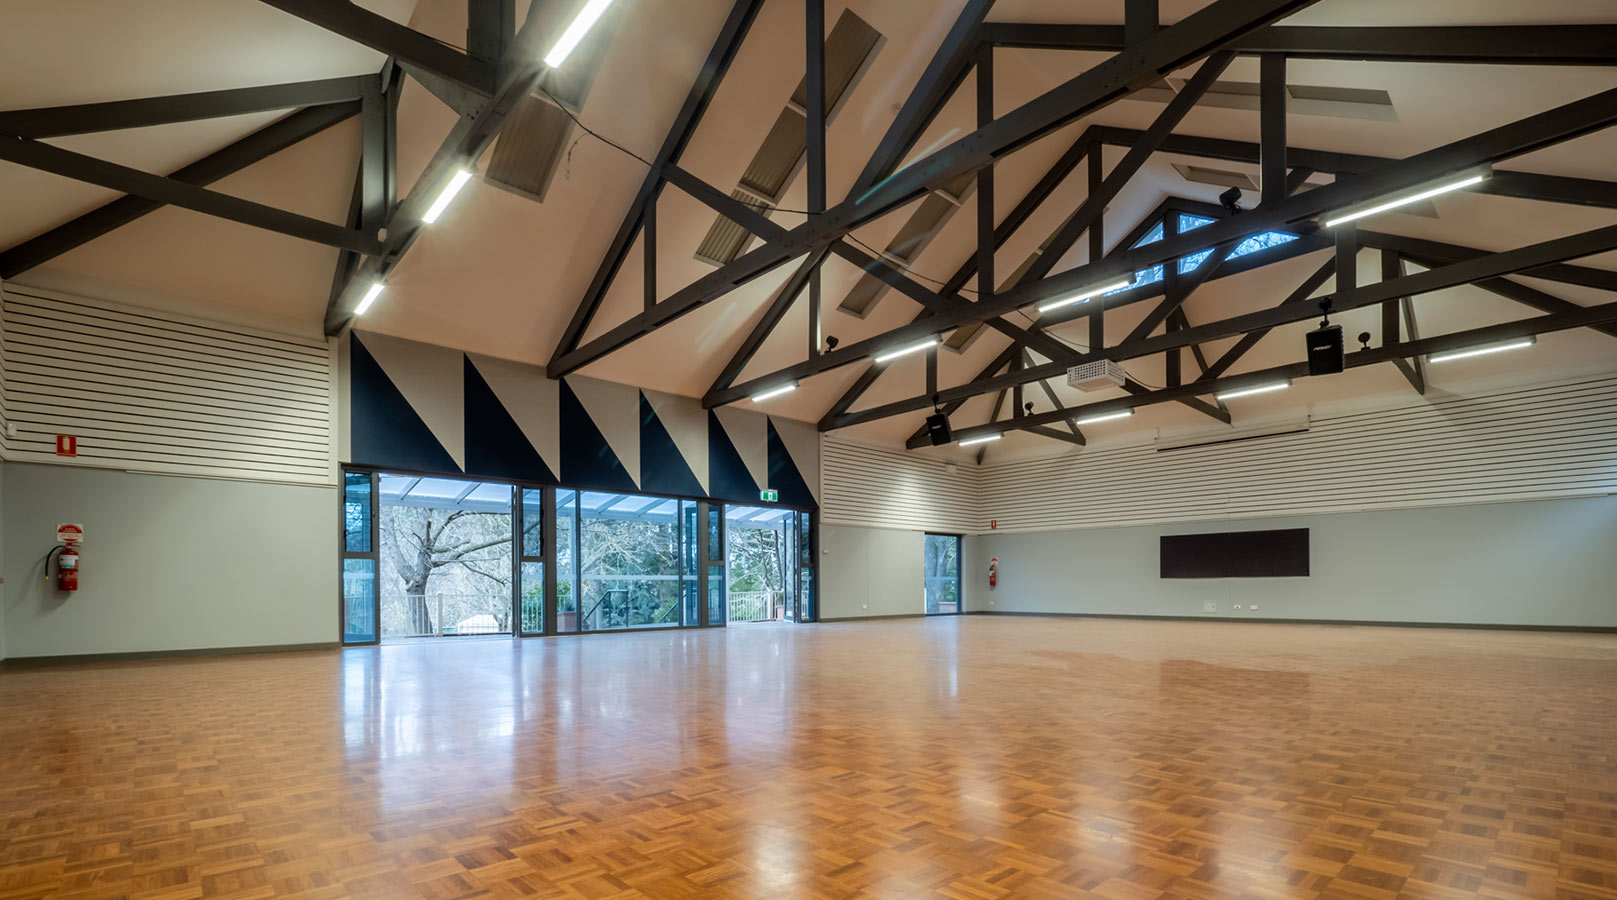 st catherines primary school adelaide construction fitout education interior assembly hall